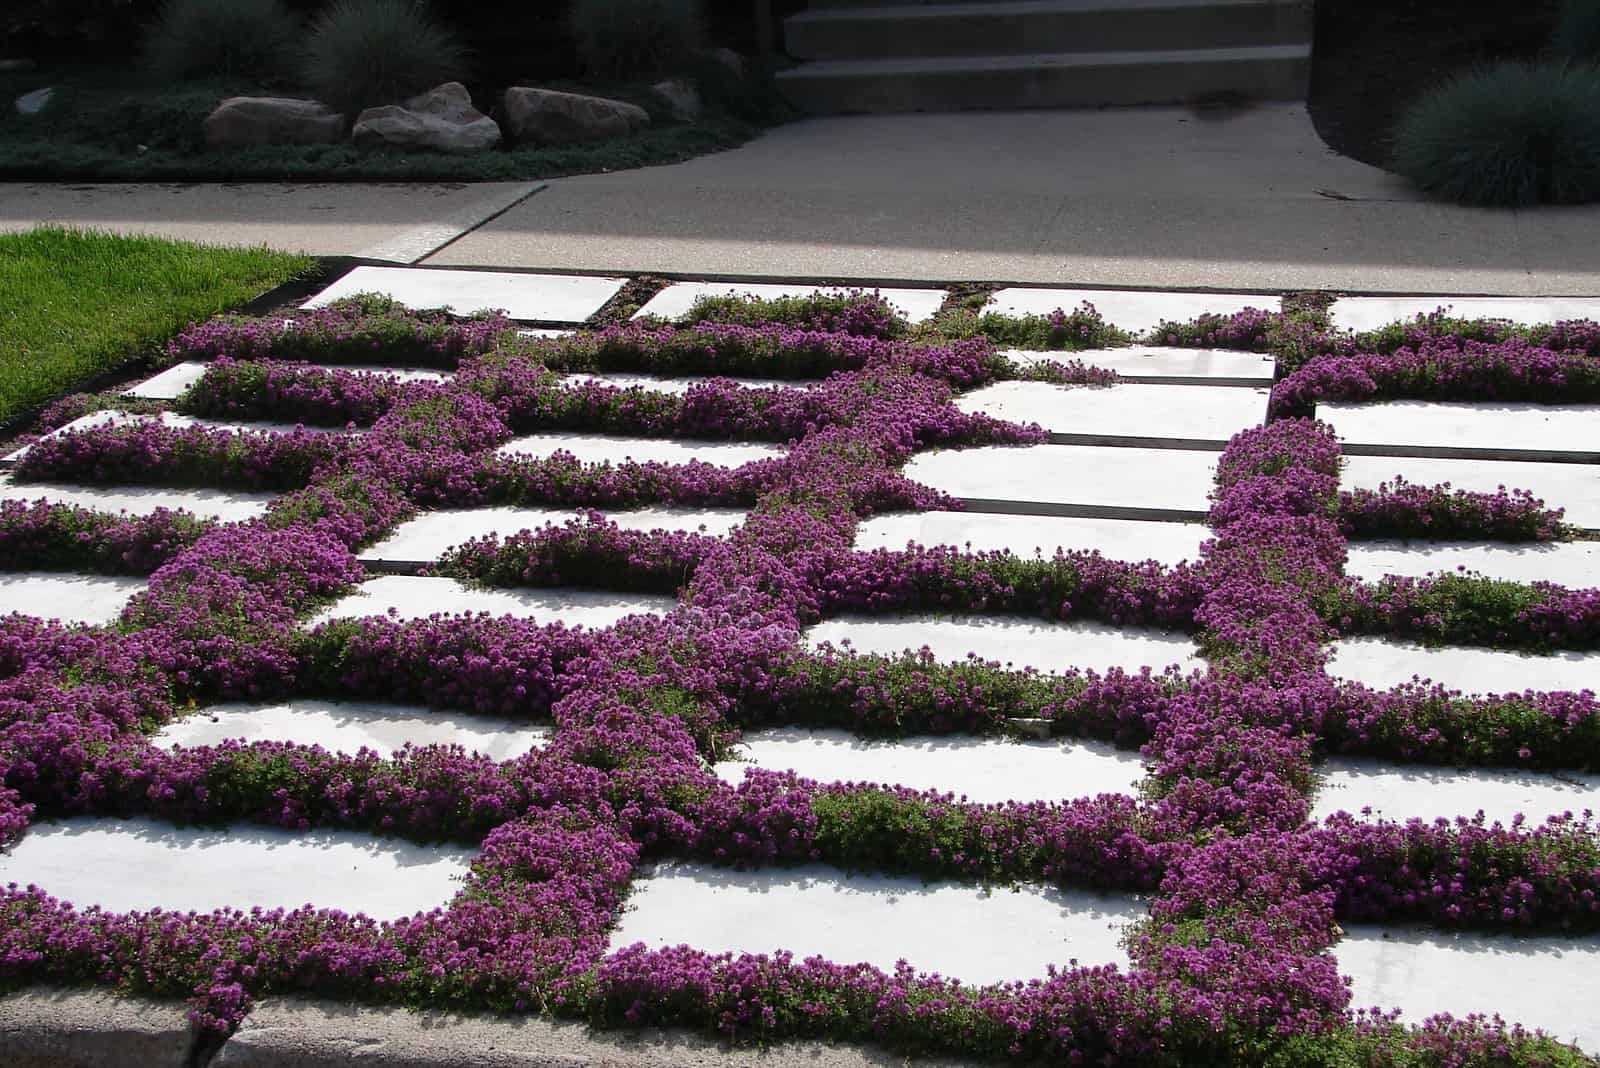 Is Creeping Thyme Invasive? The Answer Might Surprise You!